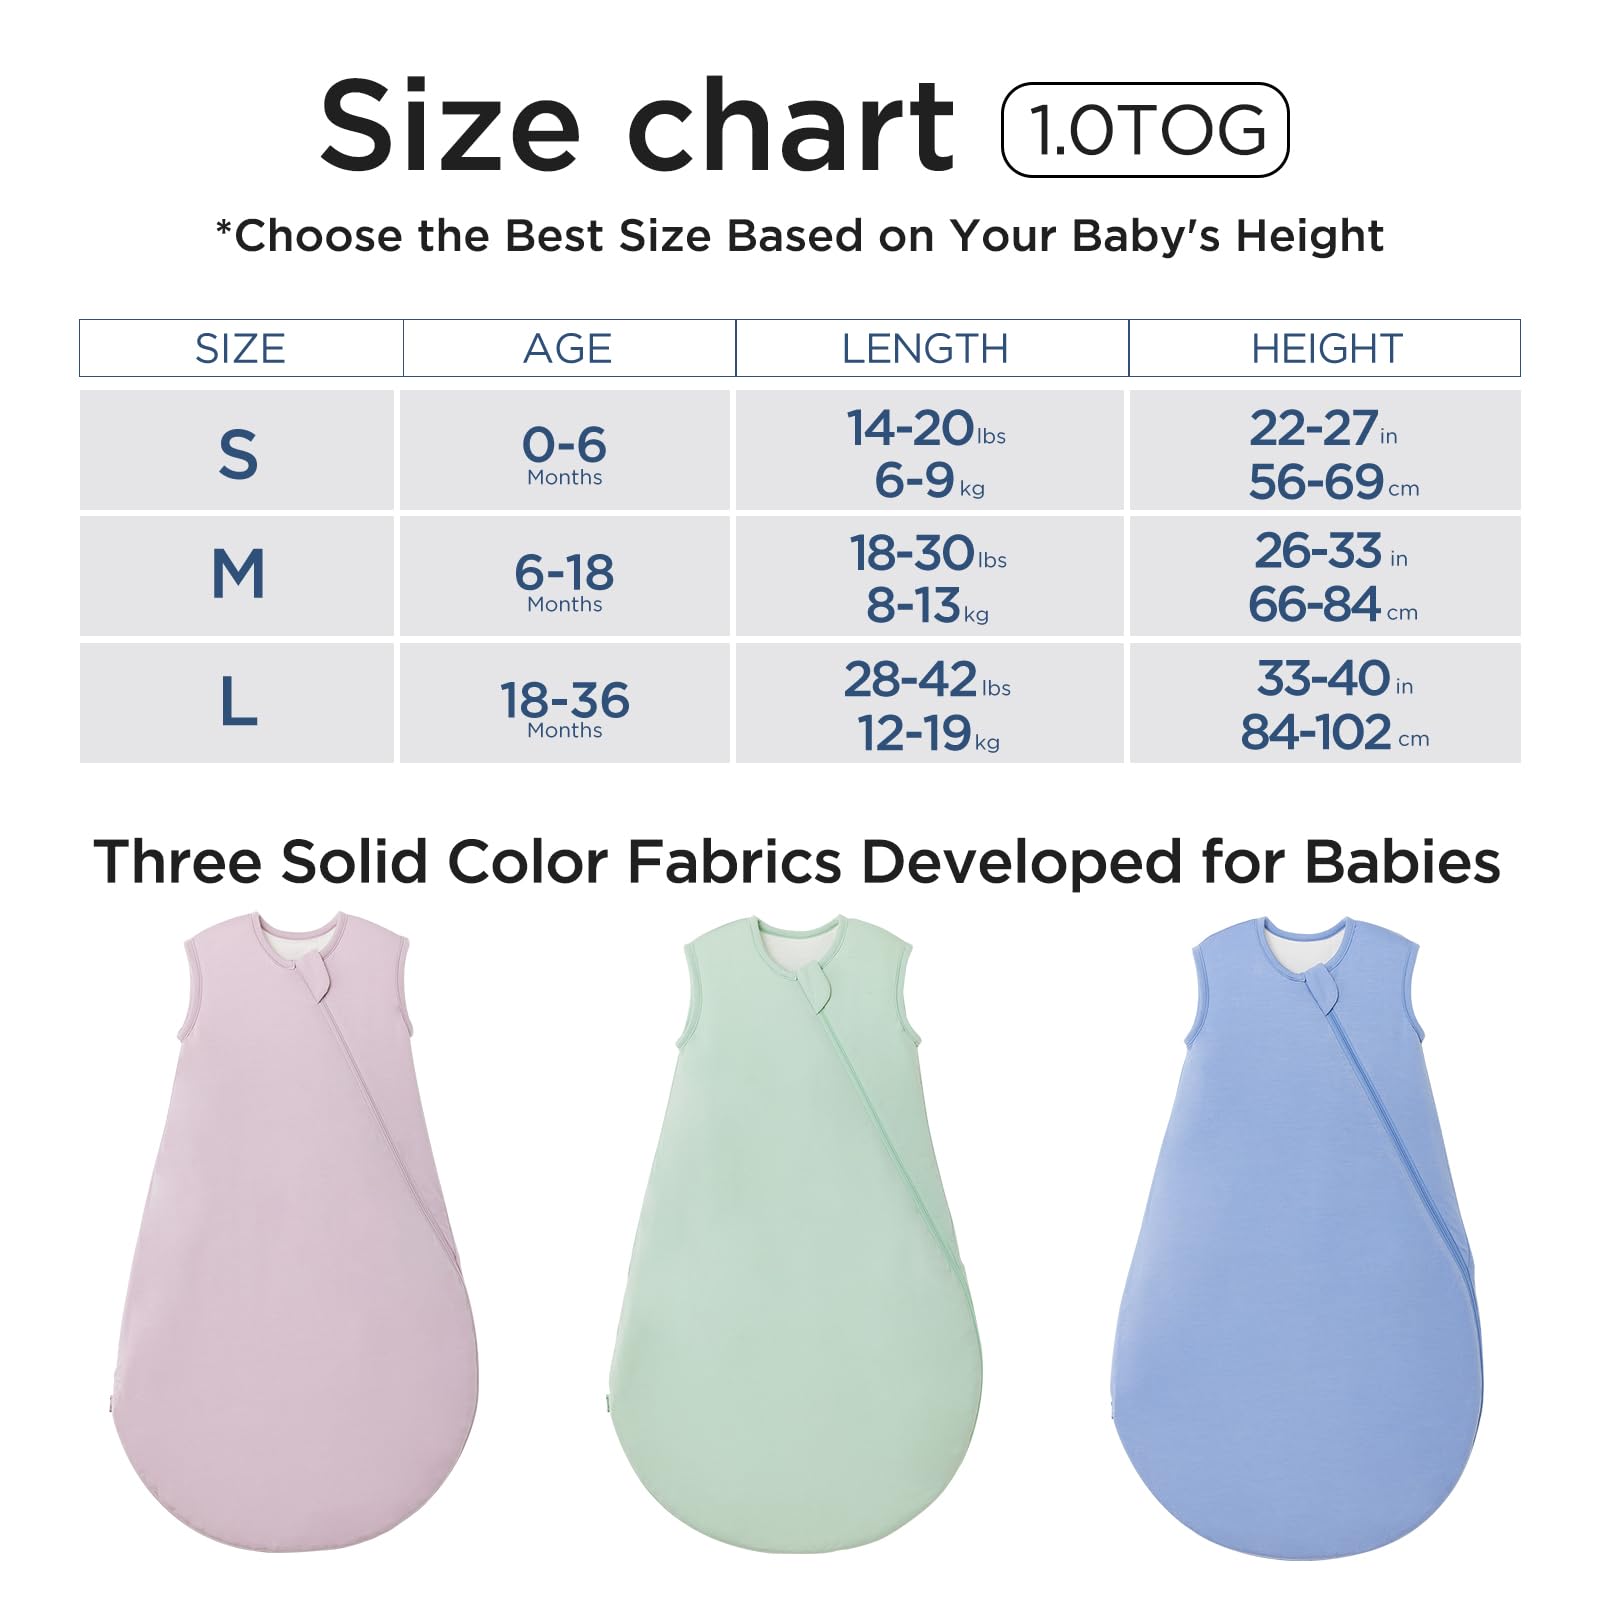 Duomiaomiao Rayon Made from Bamboo, Baby Sleep Sack Buttery Soft 1.0 TOG Baby Wearable Blanket Four Seasons